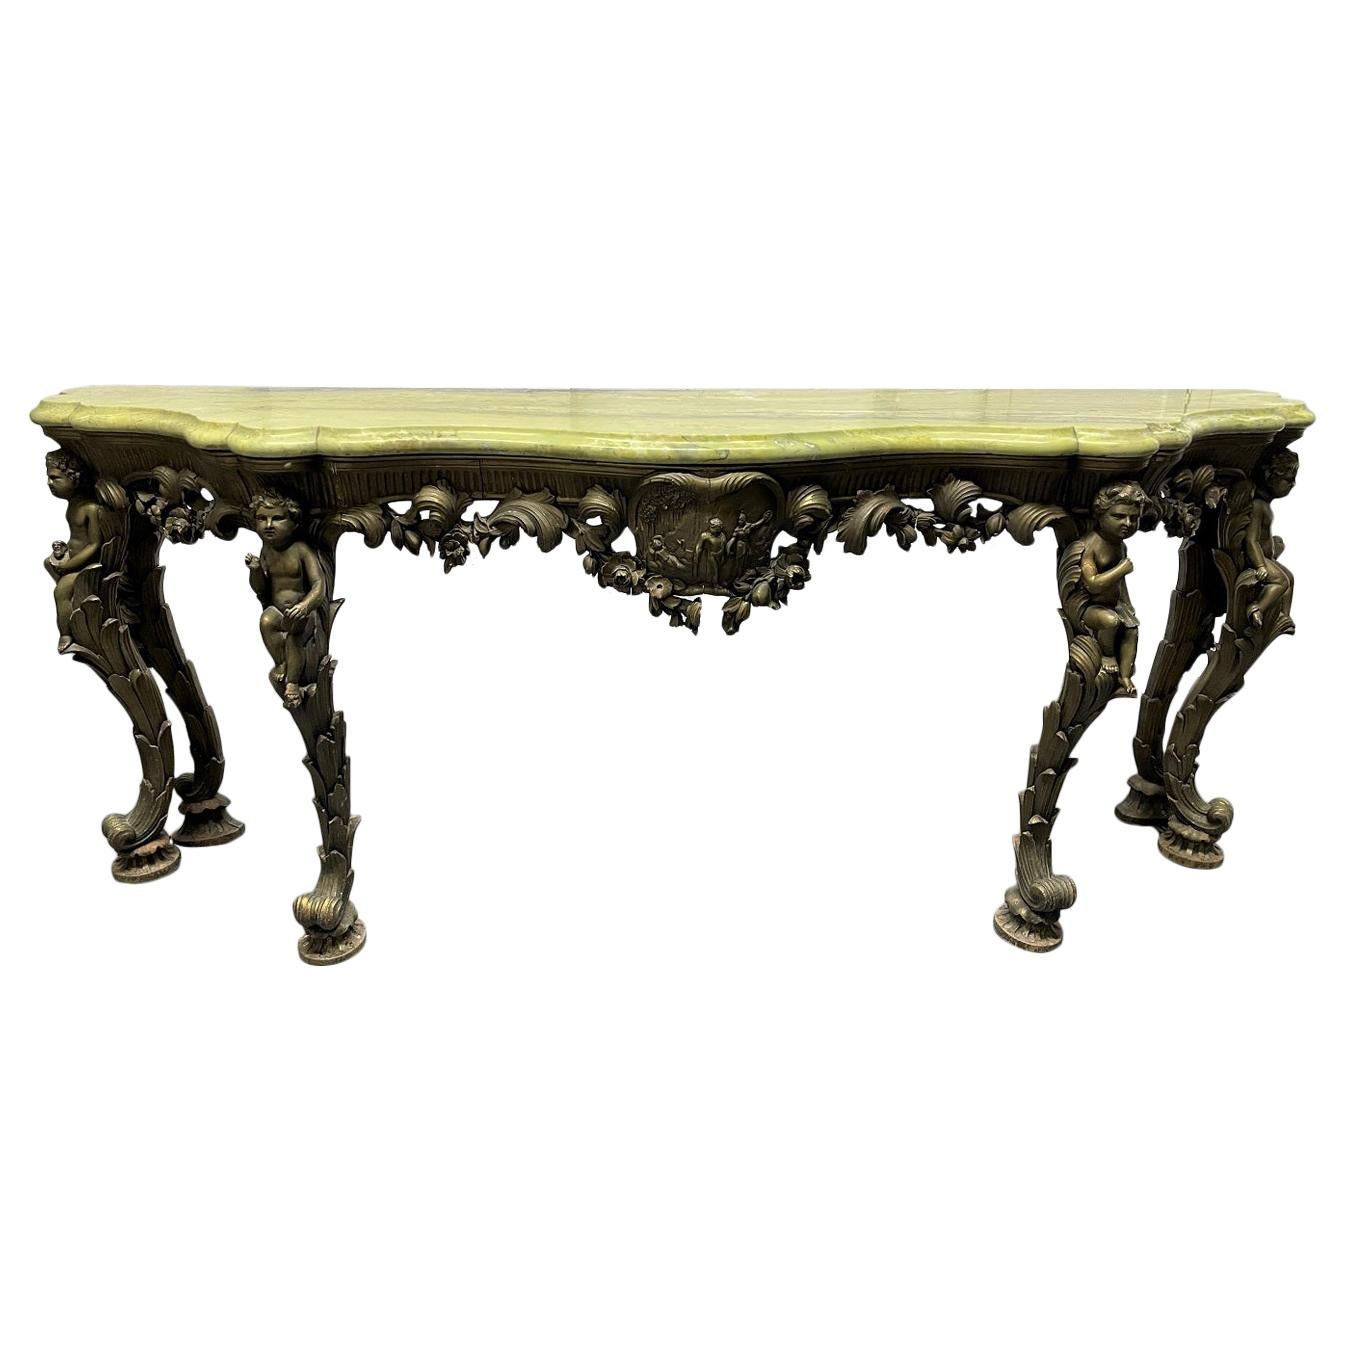 19th Century Italian Carved Wood Marble-Top Console with Puttis